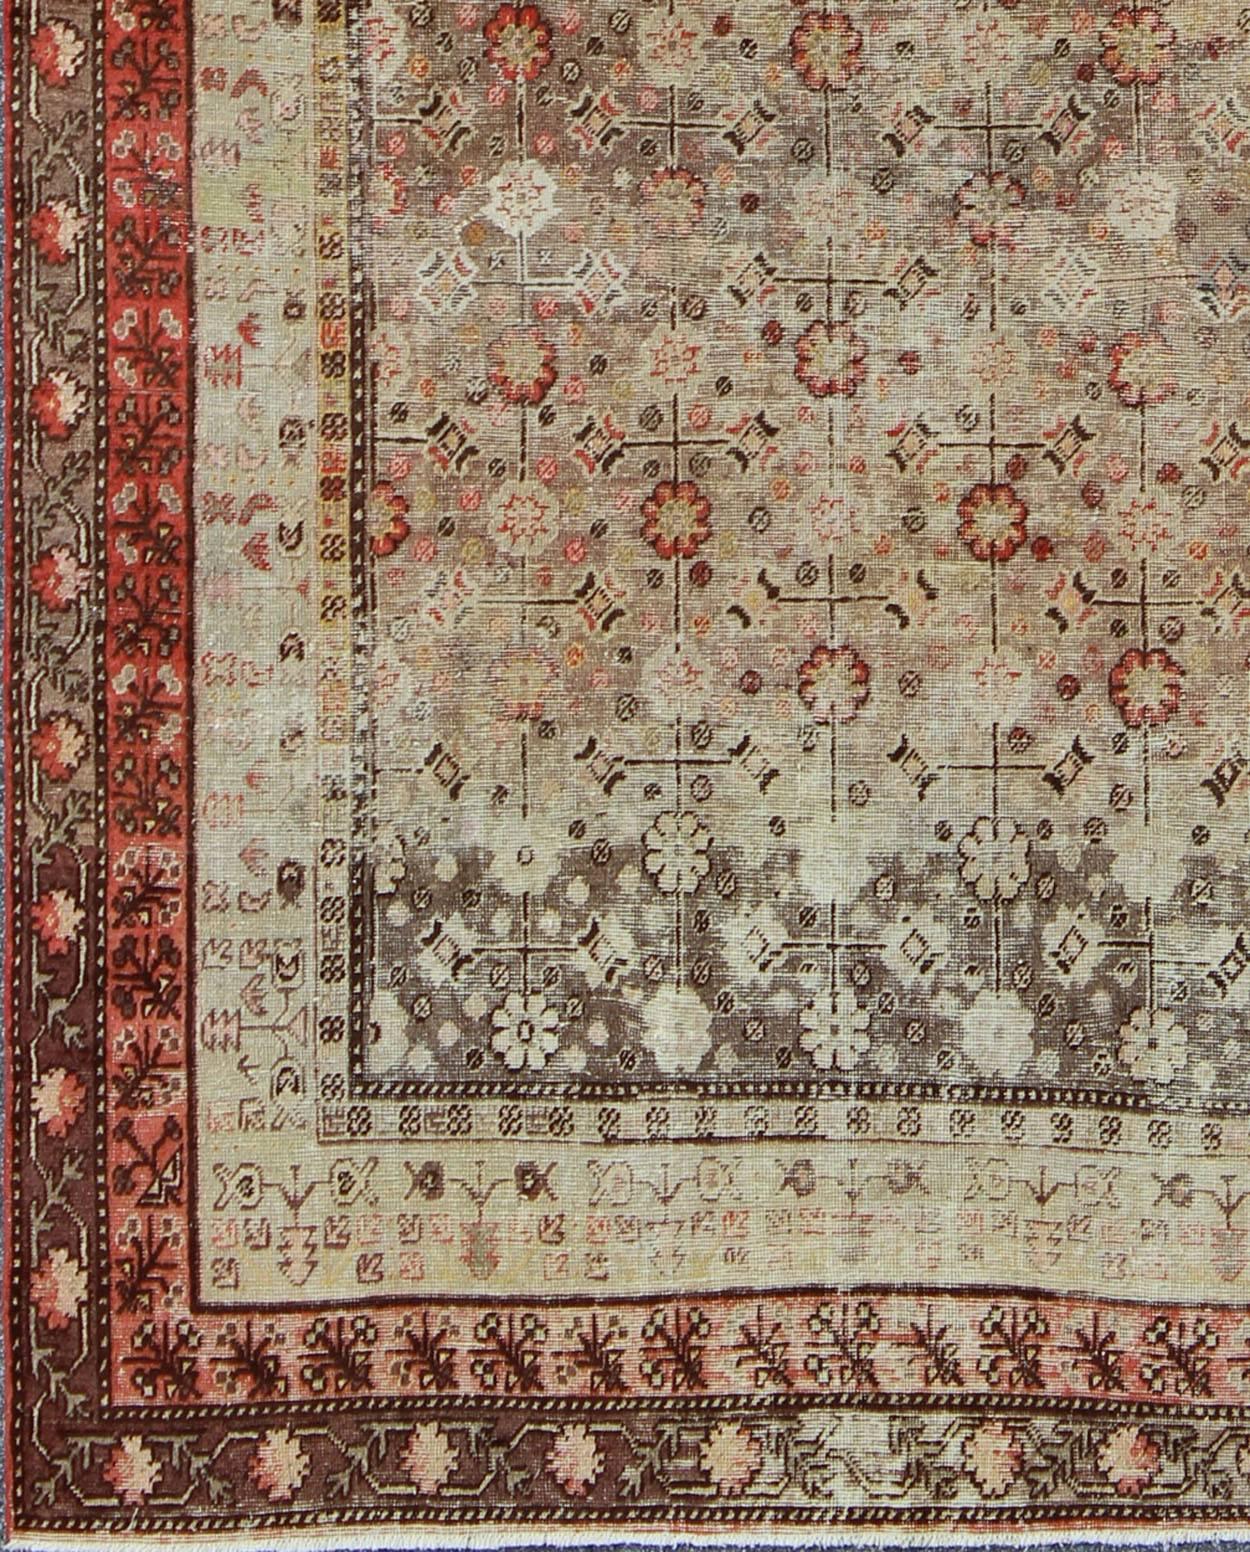 Measures: 6'3'' x 11'5''.
This Central Asian Khotan rug is an antique from the early 20th century. This piece features a traditional all-over flower pattern on a charcoal to tan field surrounded by multiple complementary floral borders of coral